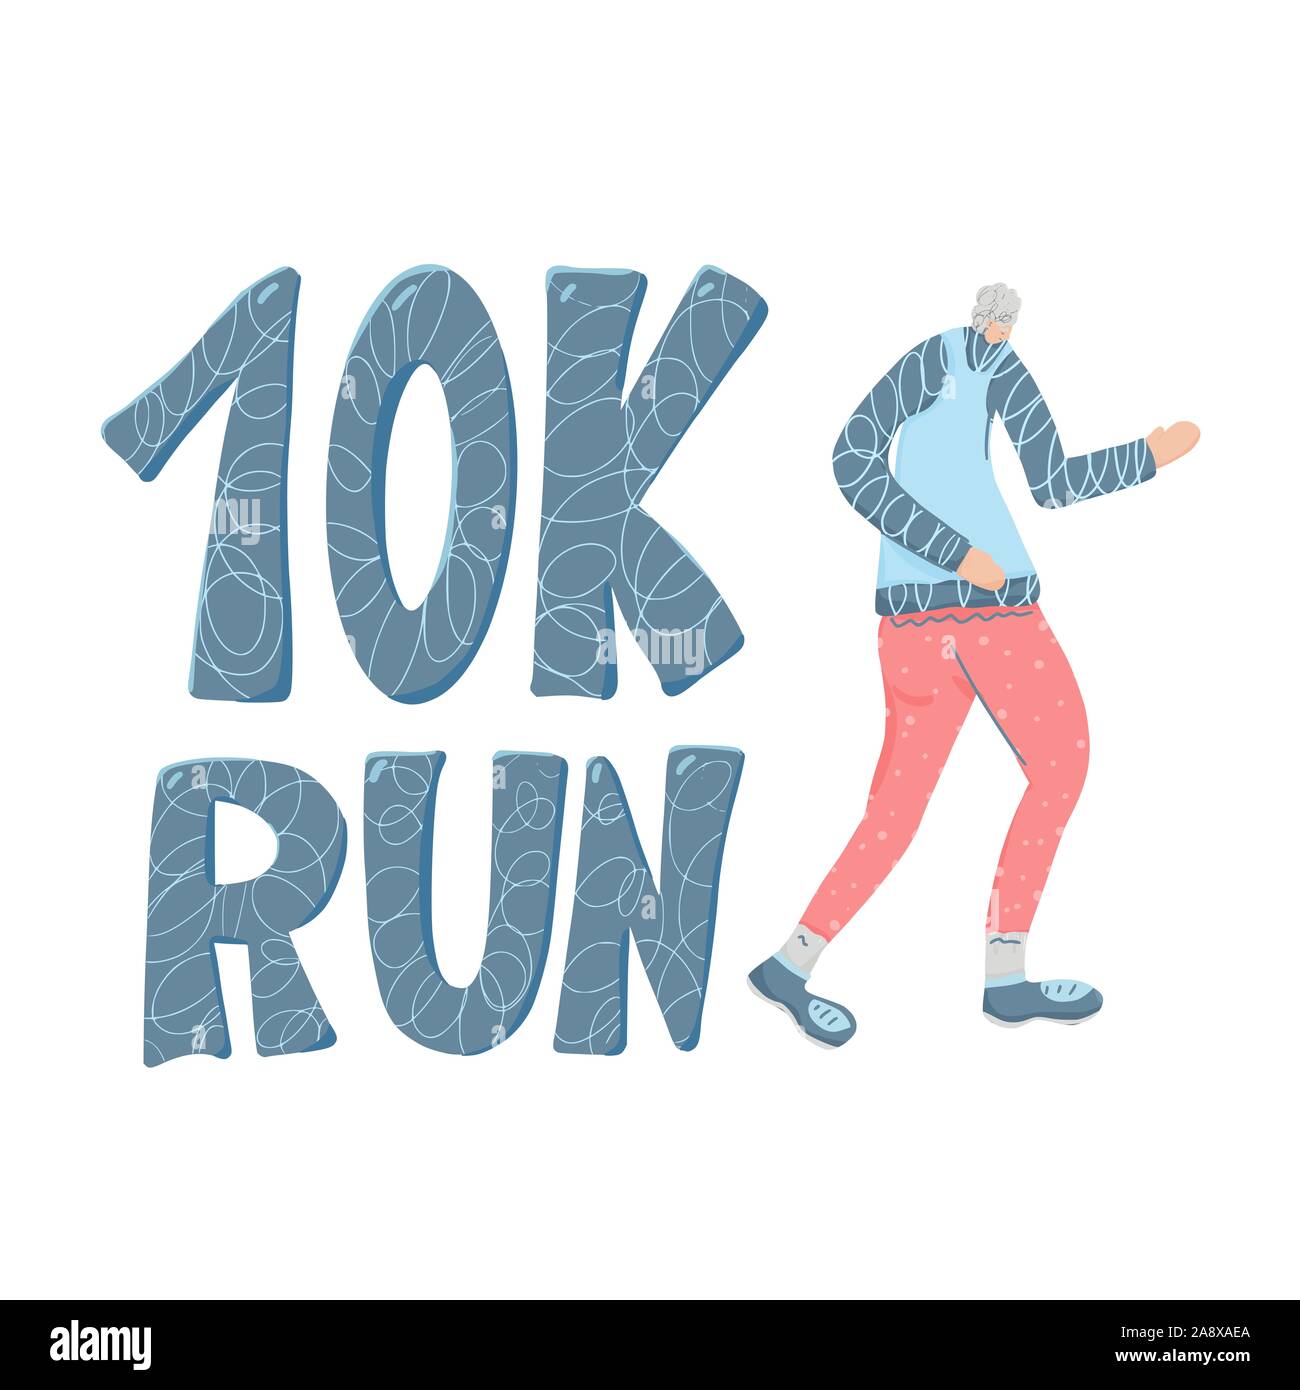 10K run text with old lady runner. Vector illustration. Stock Vector